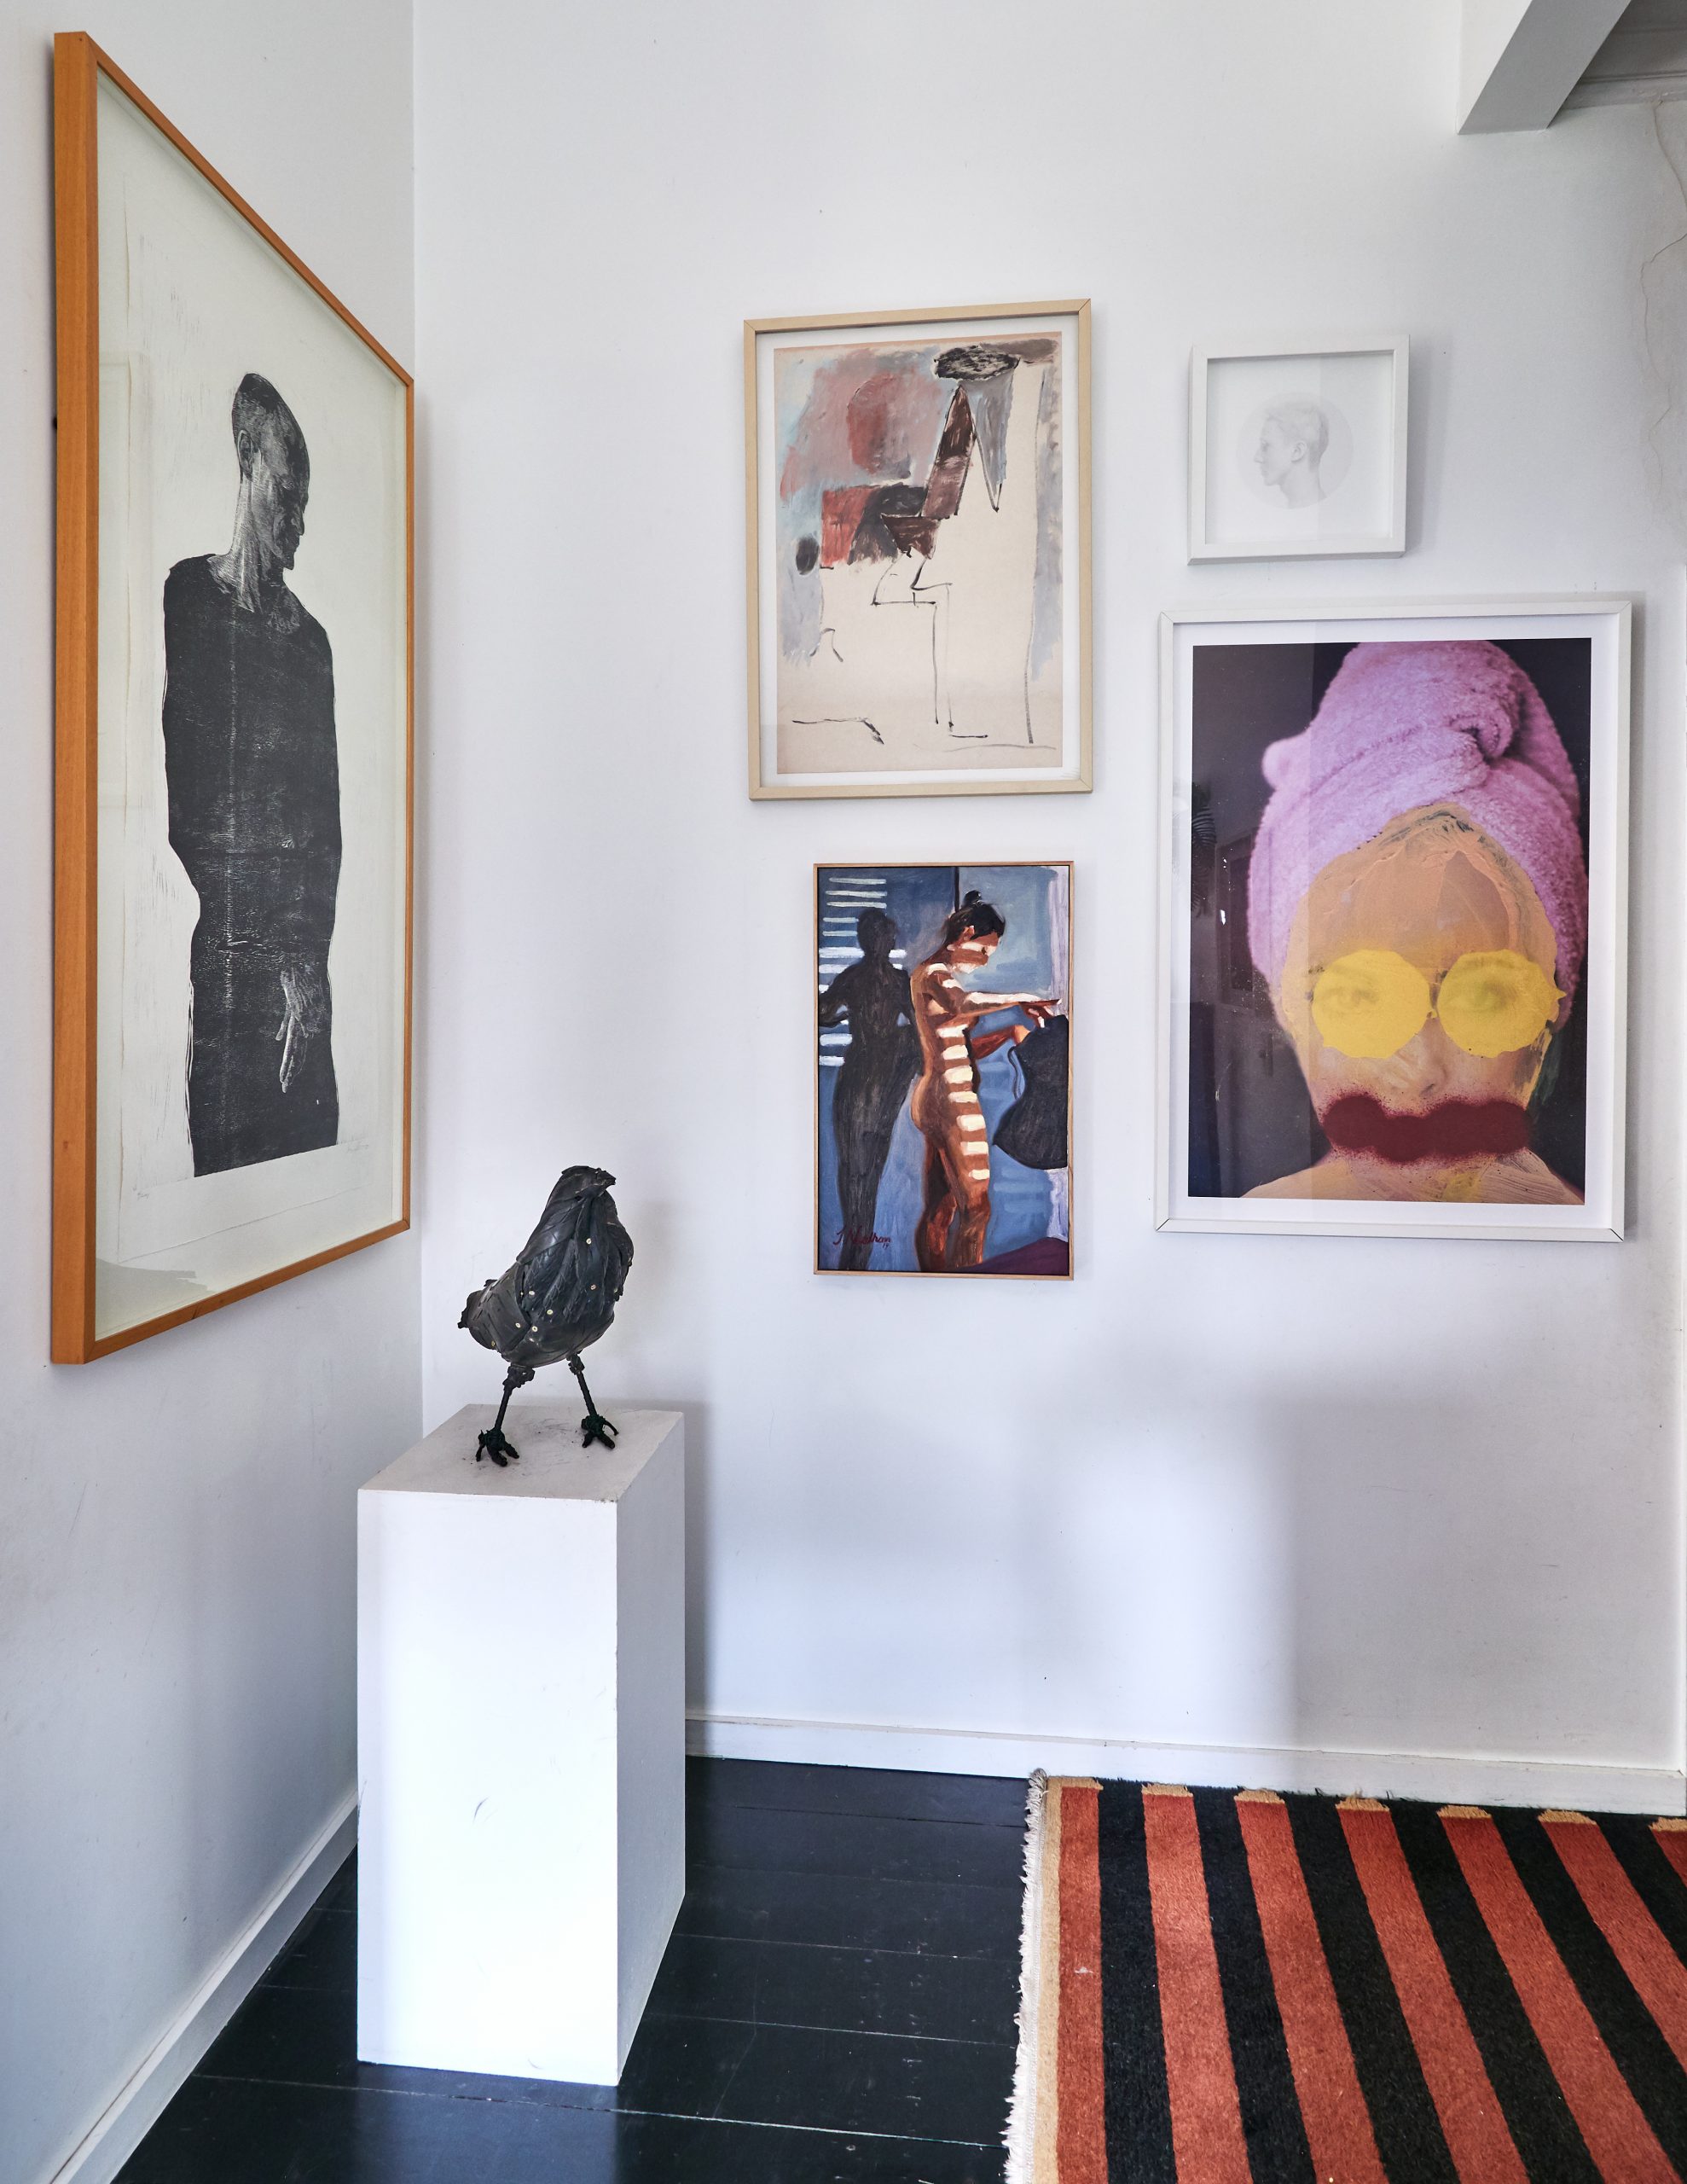 gallery wall display with bird sculpture